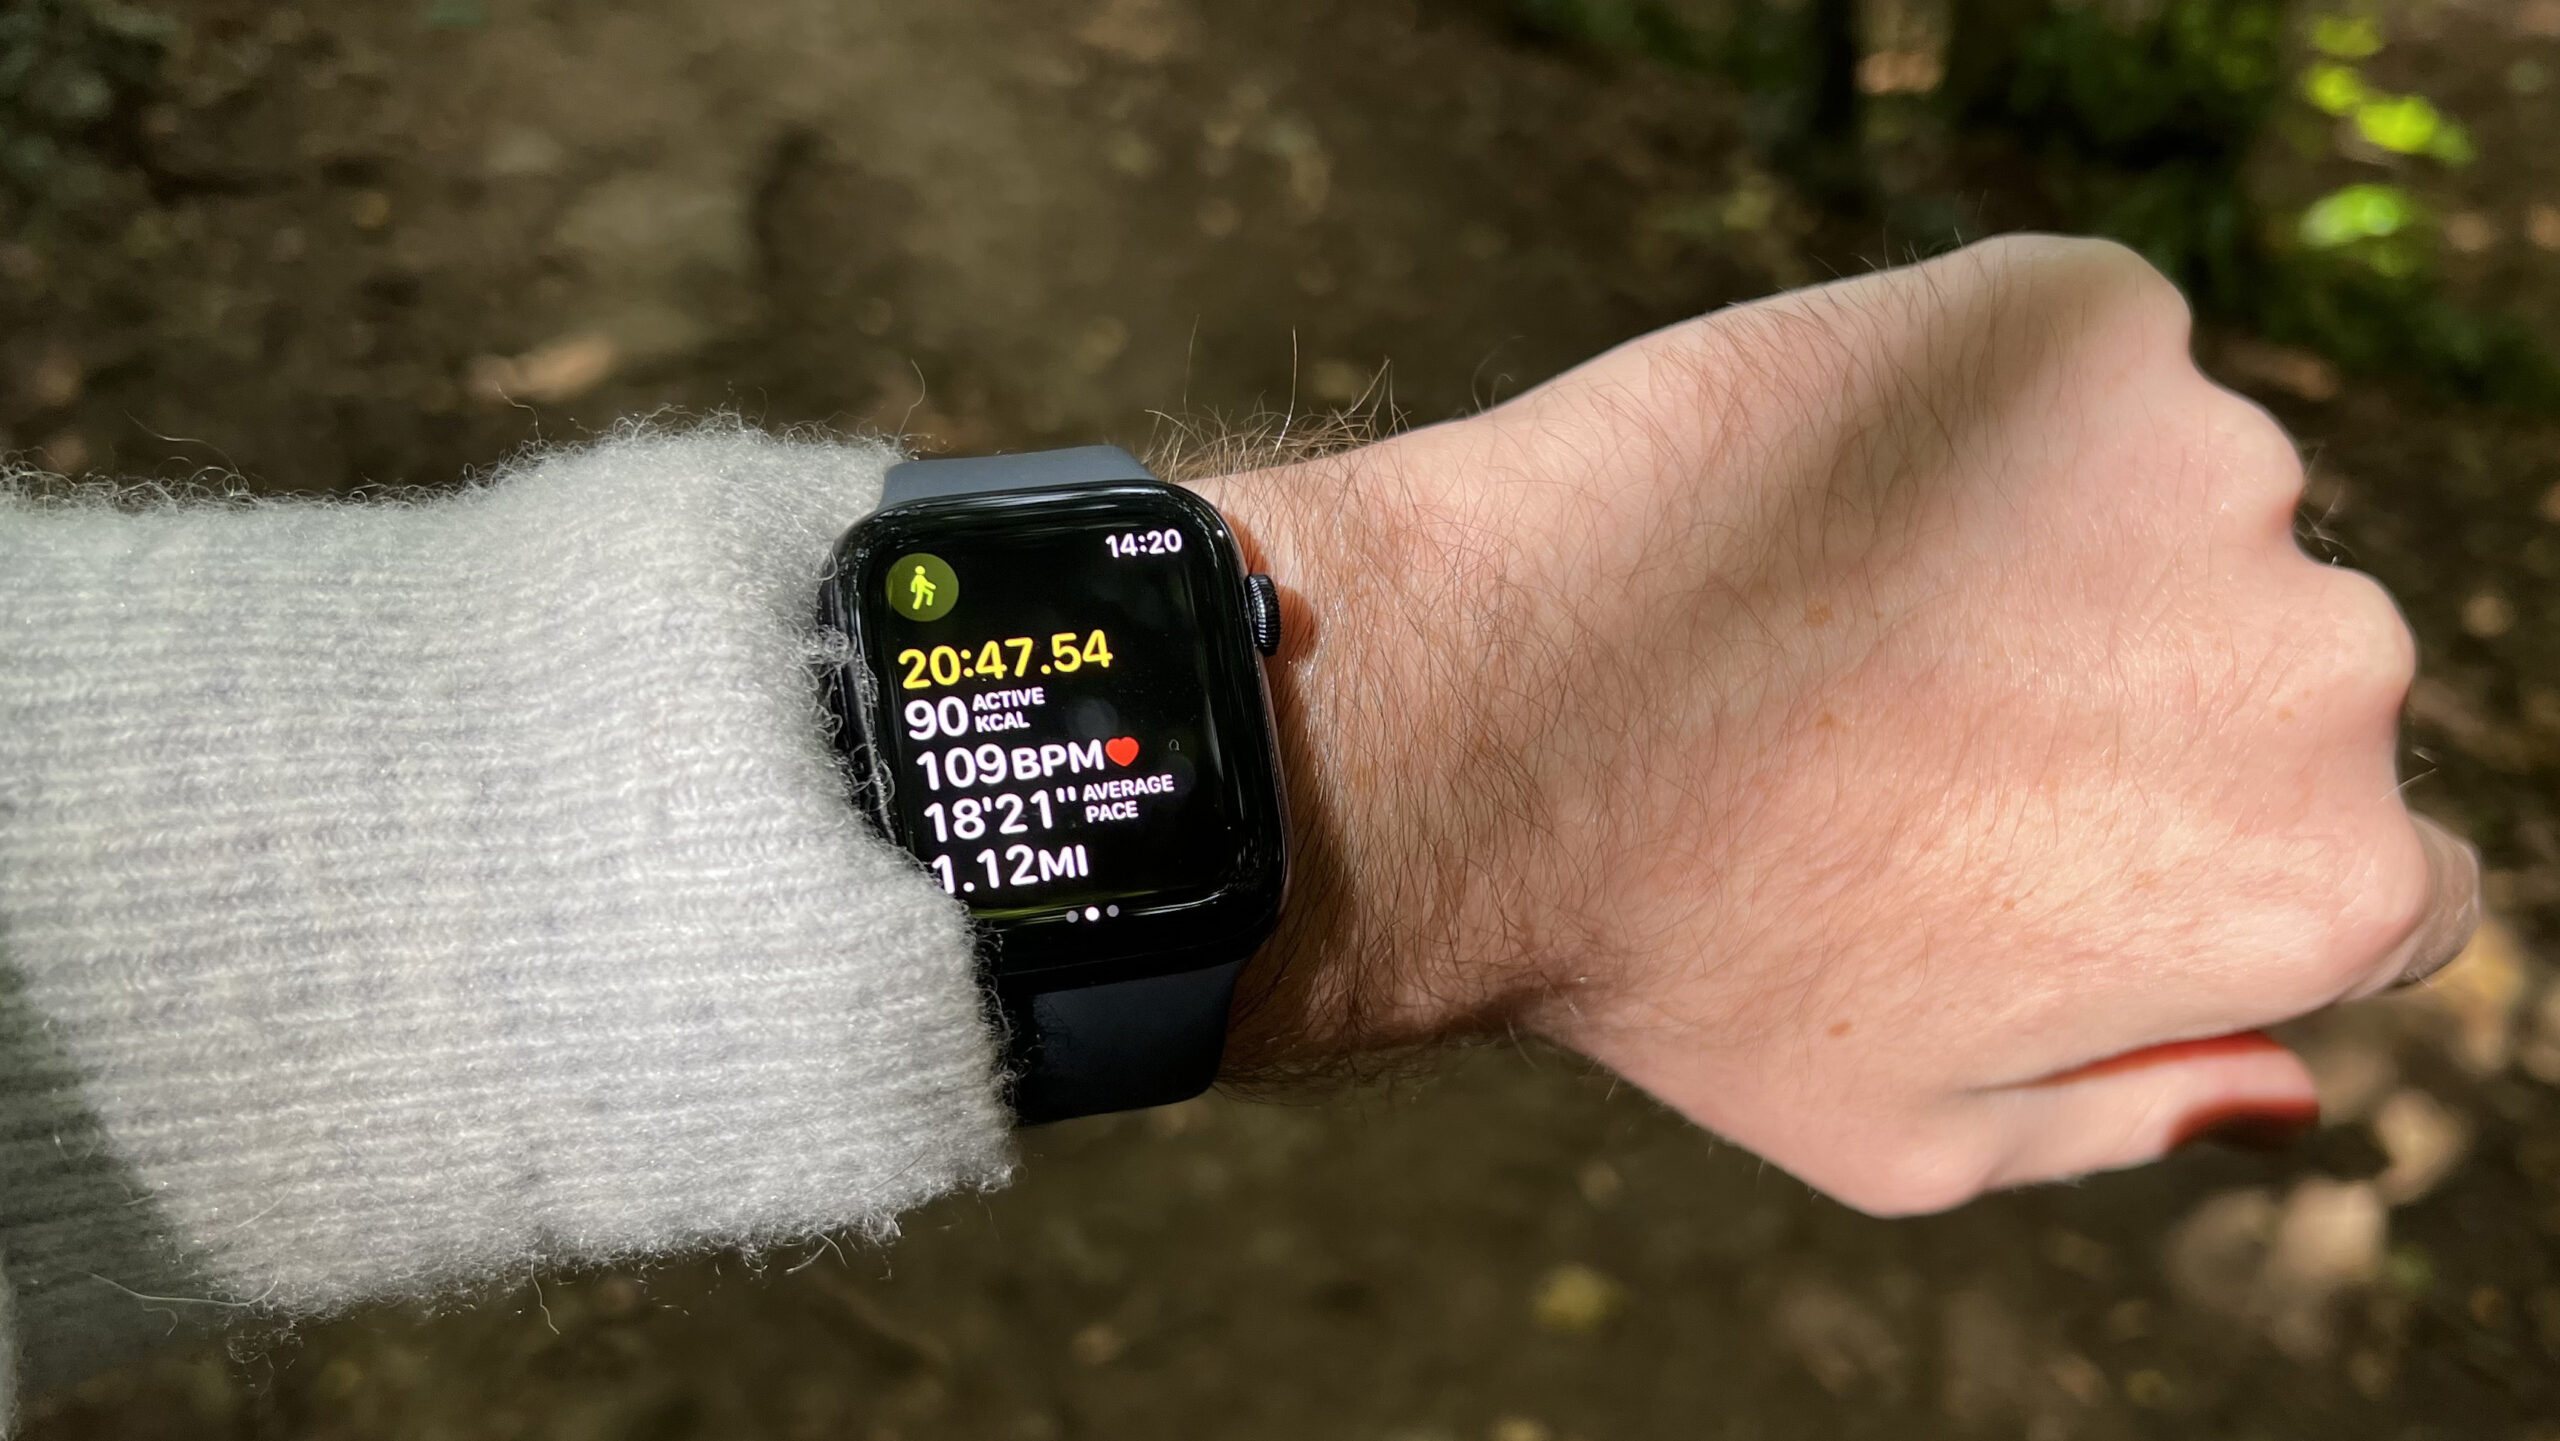 Apple Watch SE 2 Review